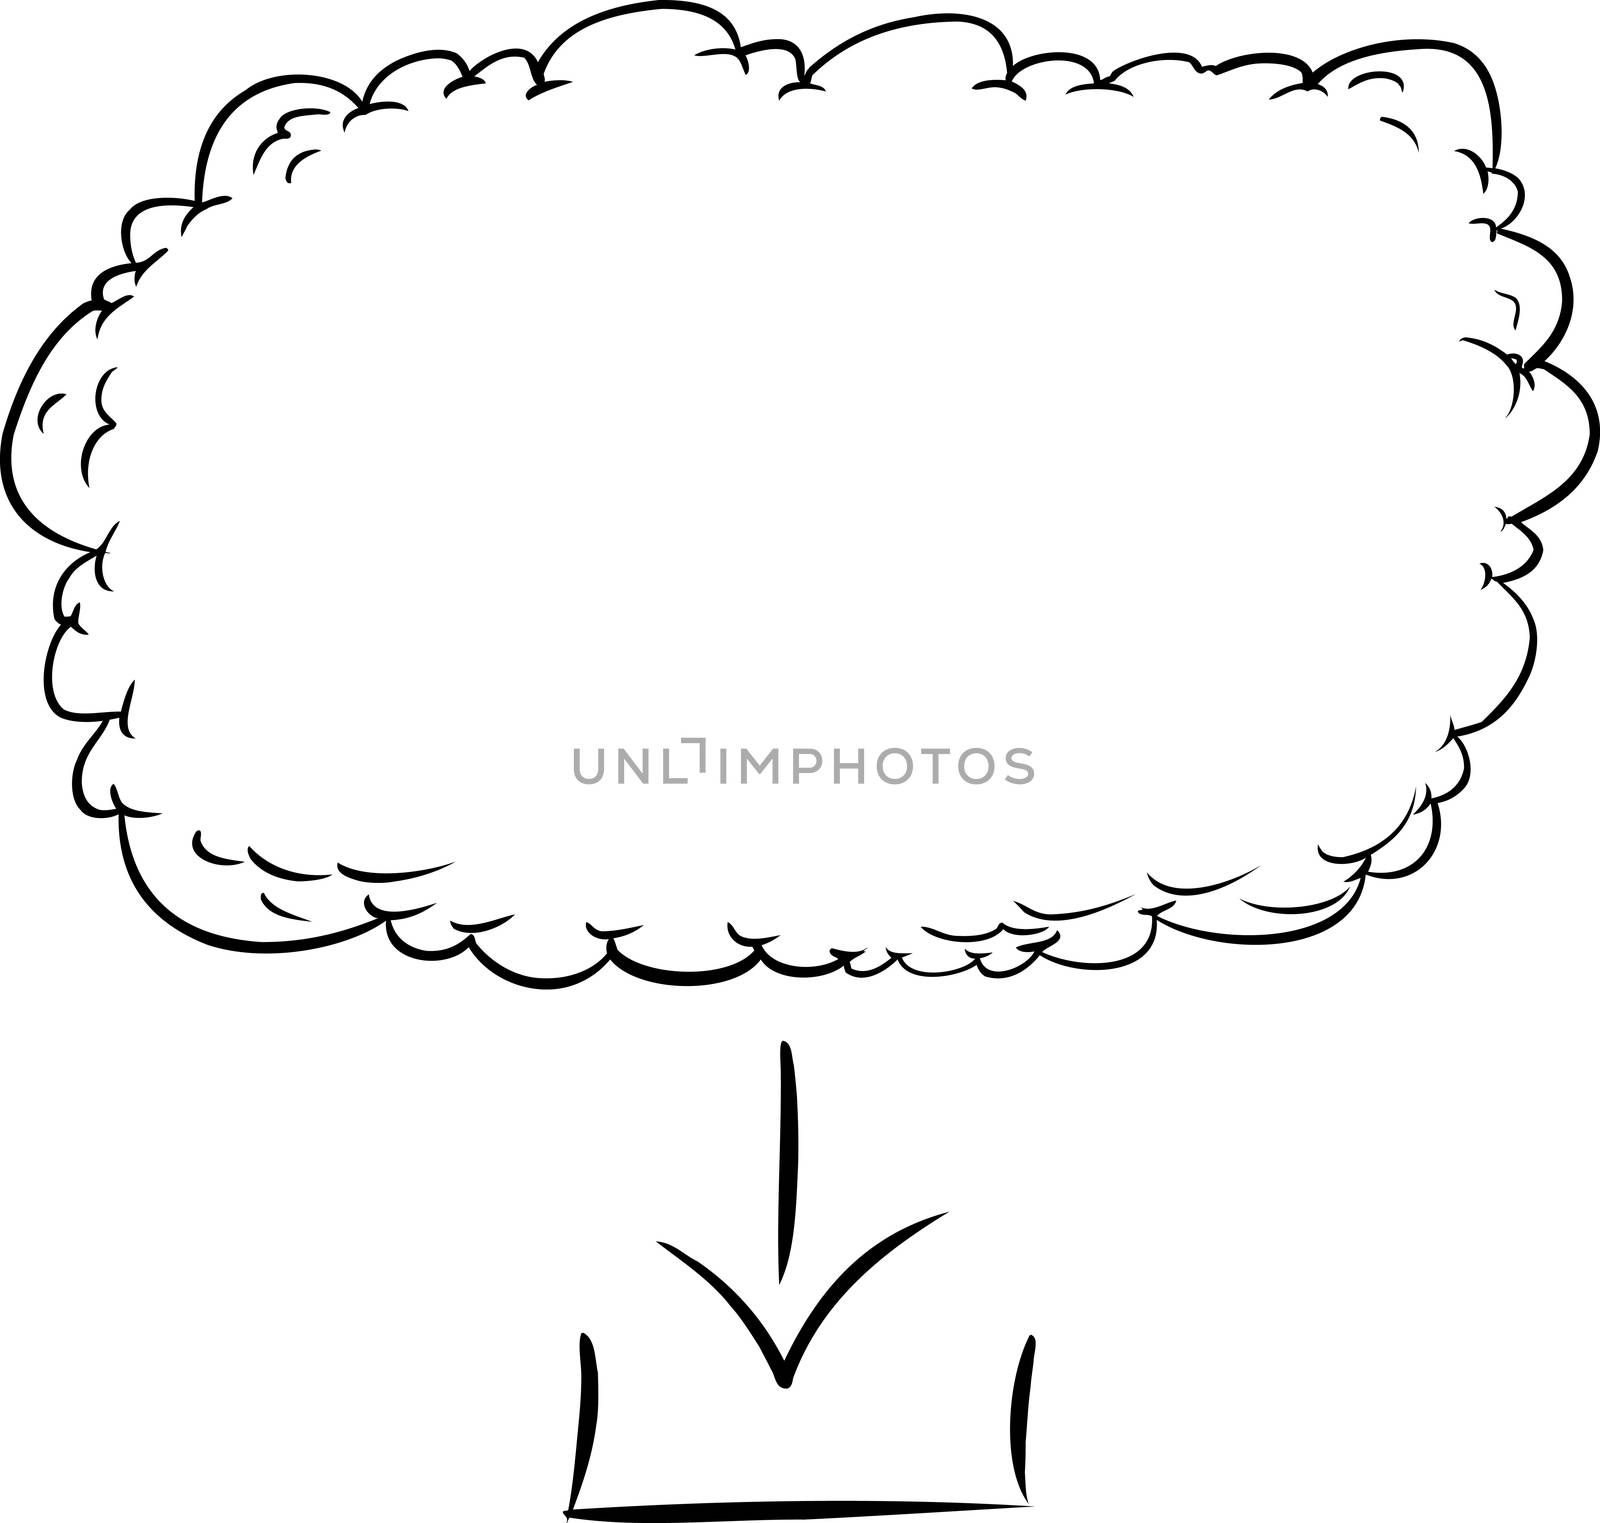 Outlined Digital Cloud Graphic by TheBlackRhino